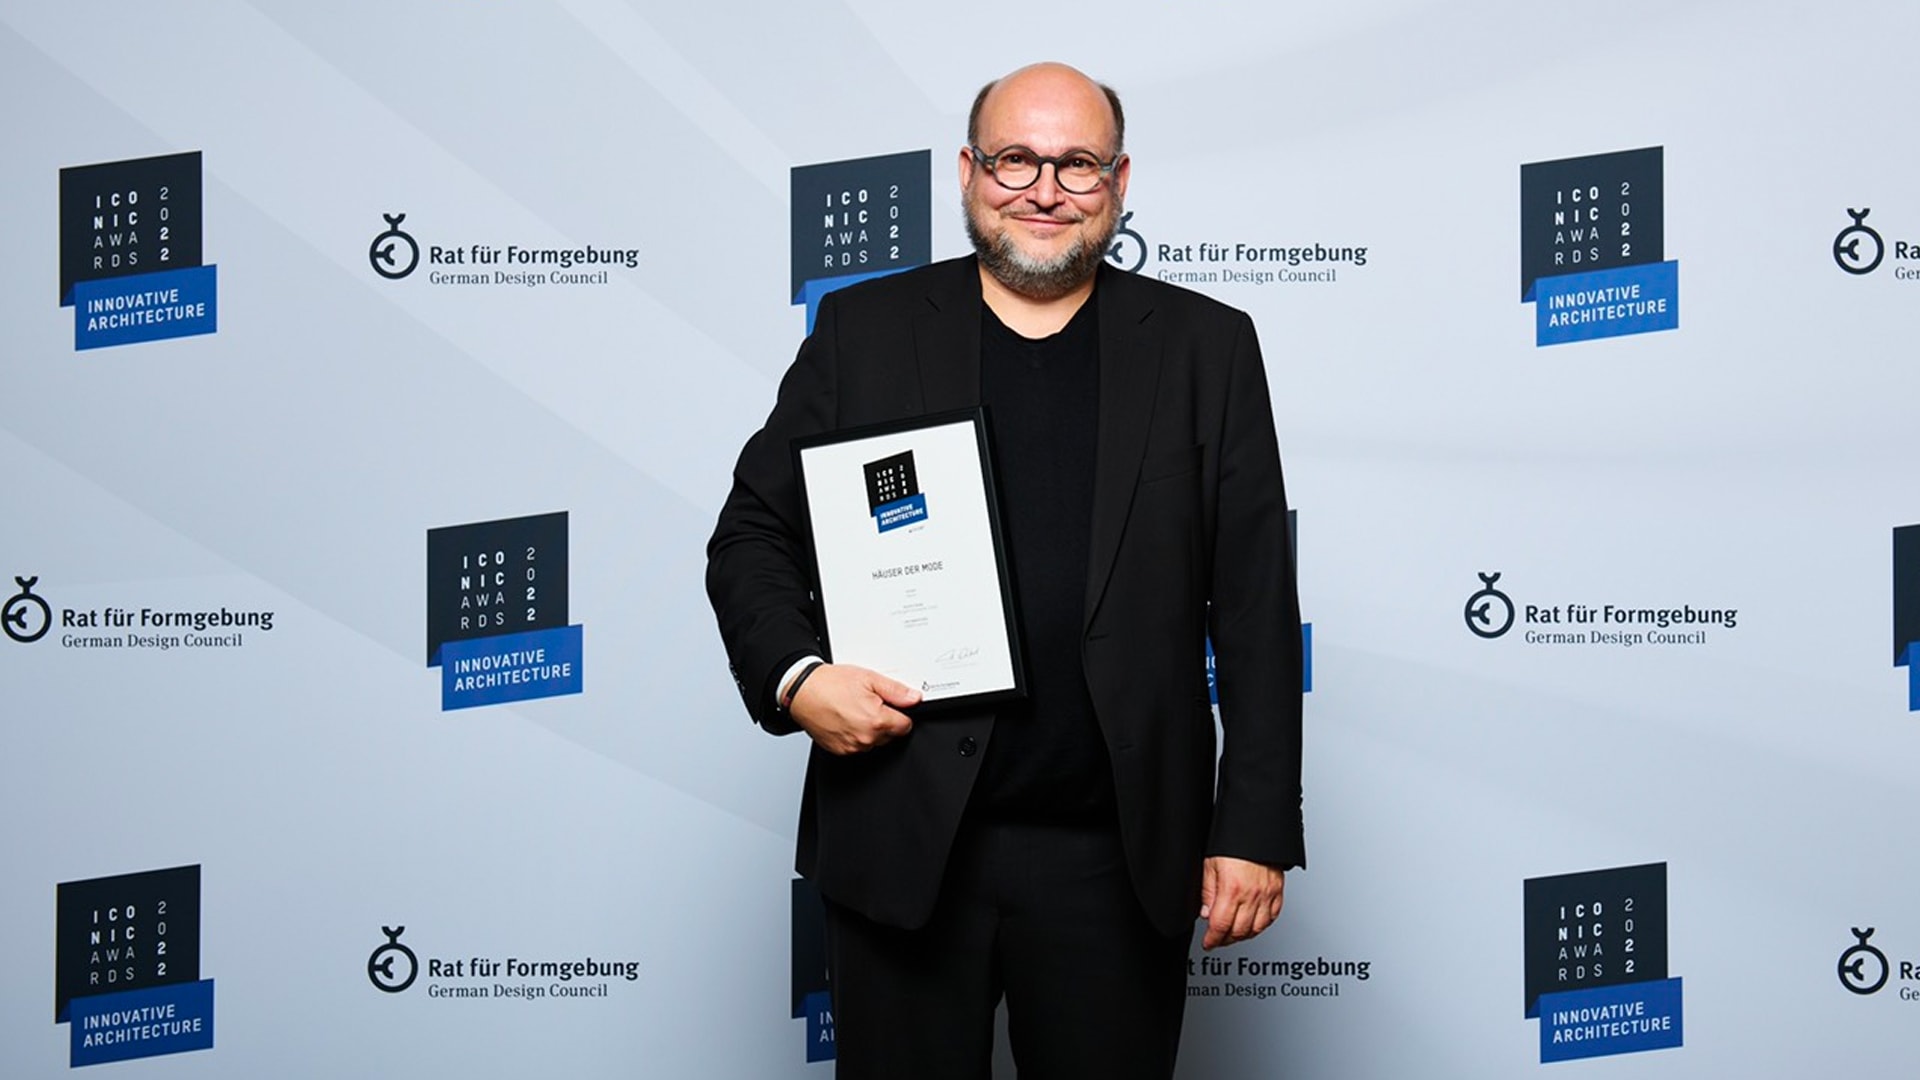 Häuser der Mode wins the Iconic Award in the category of Innovative Architektur